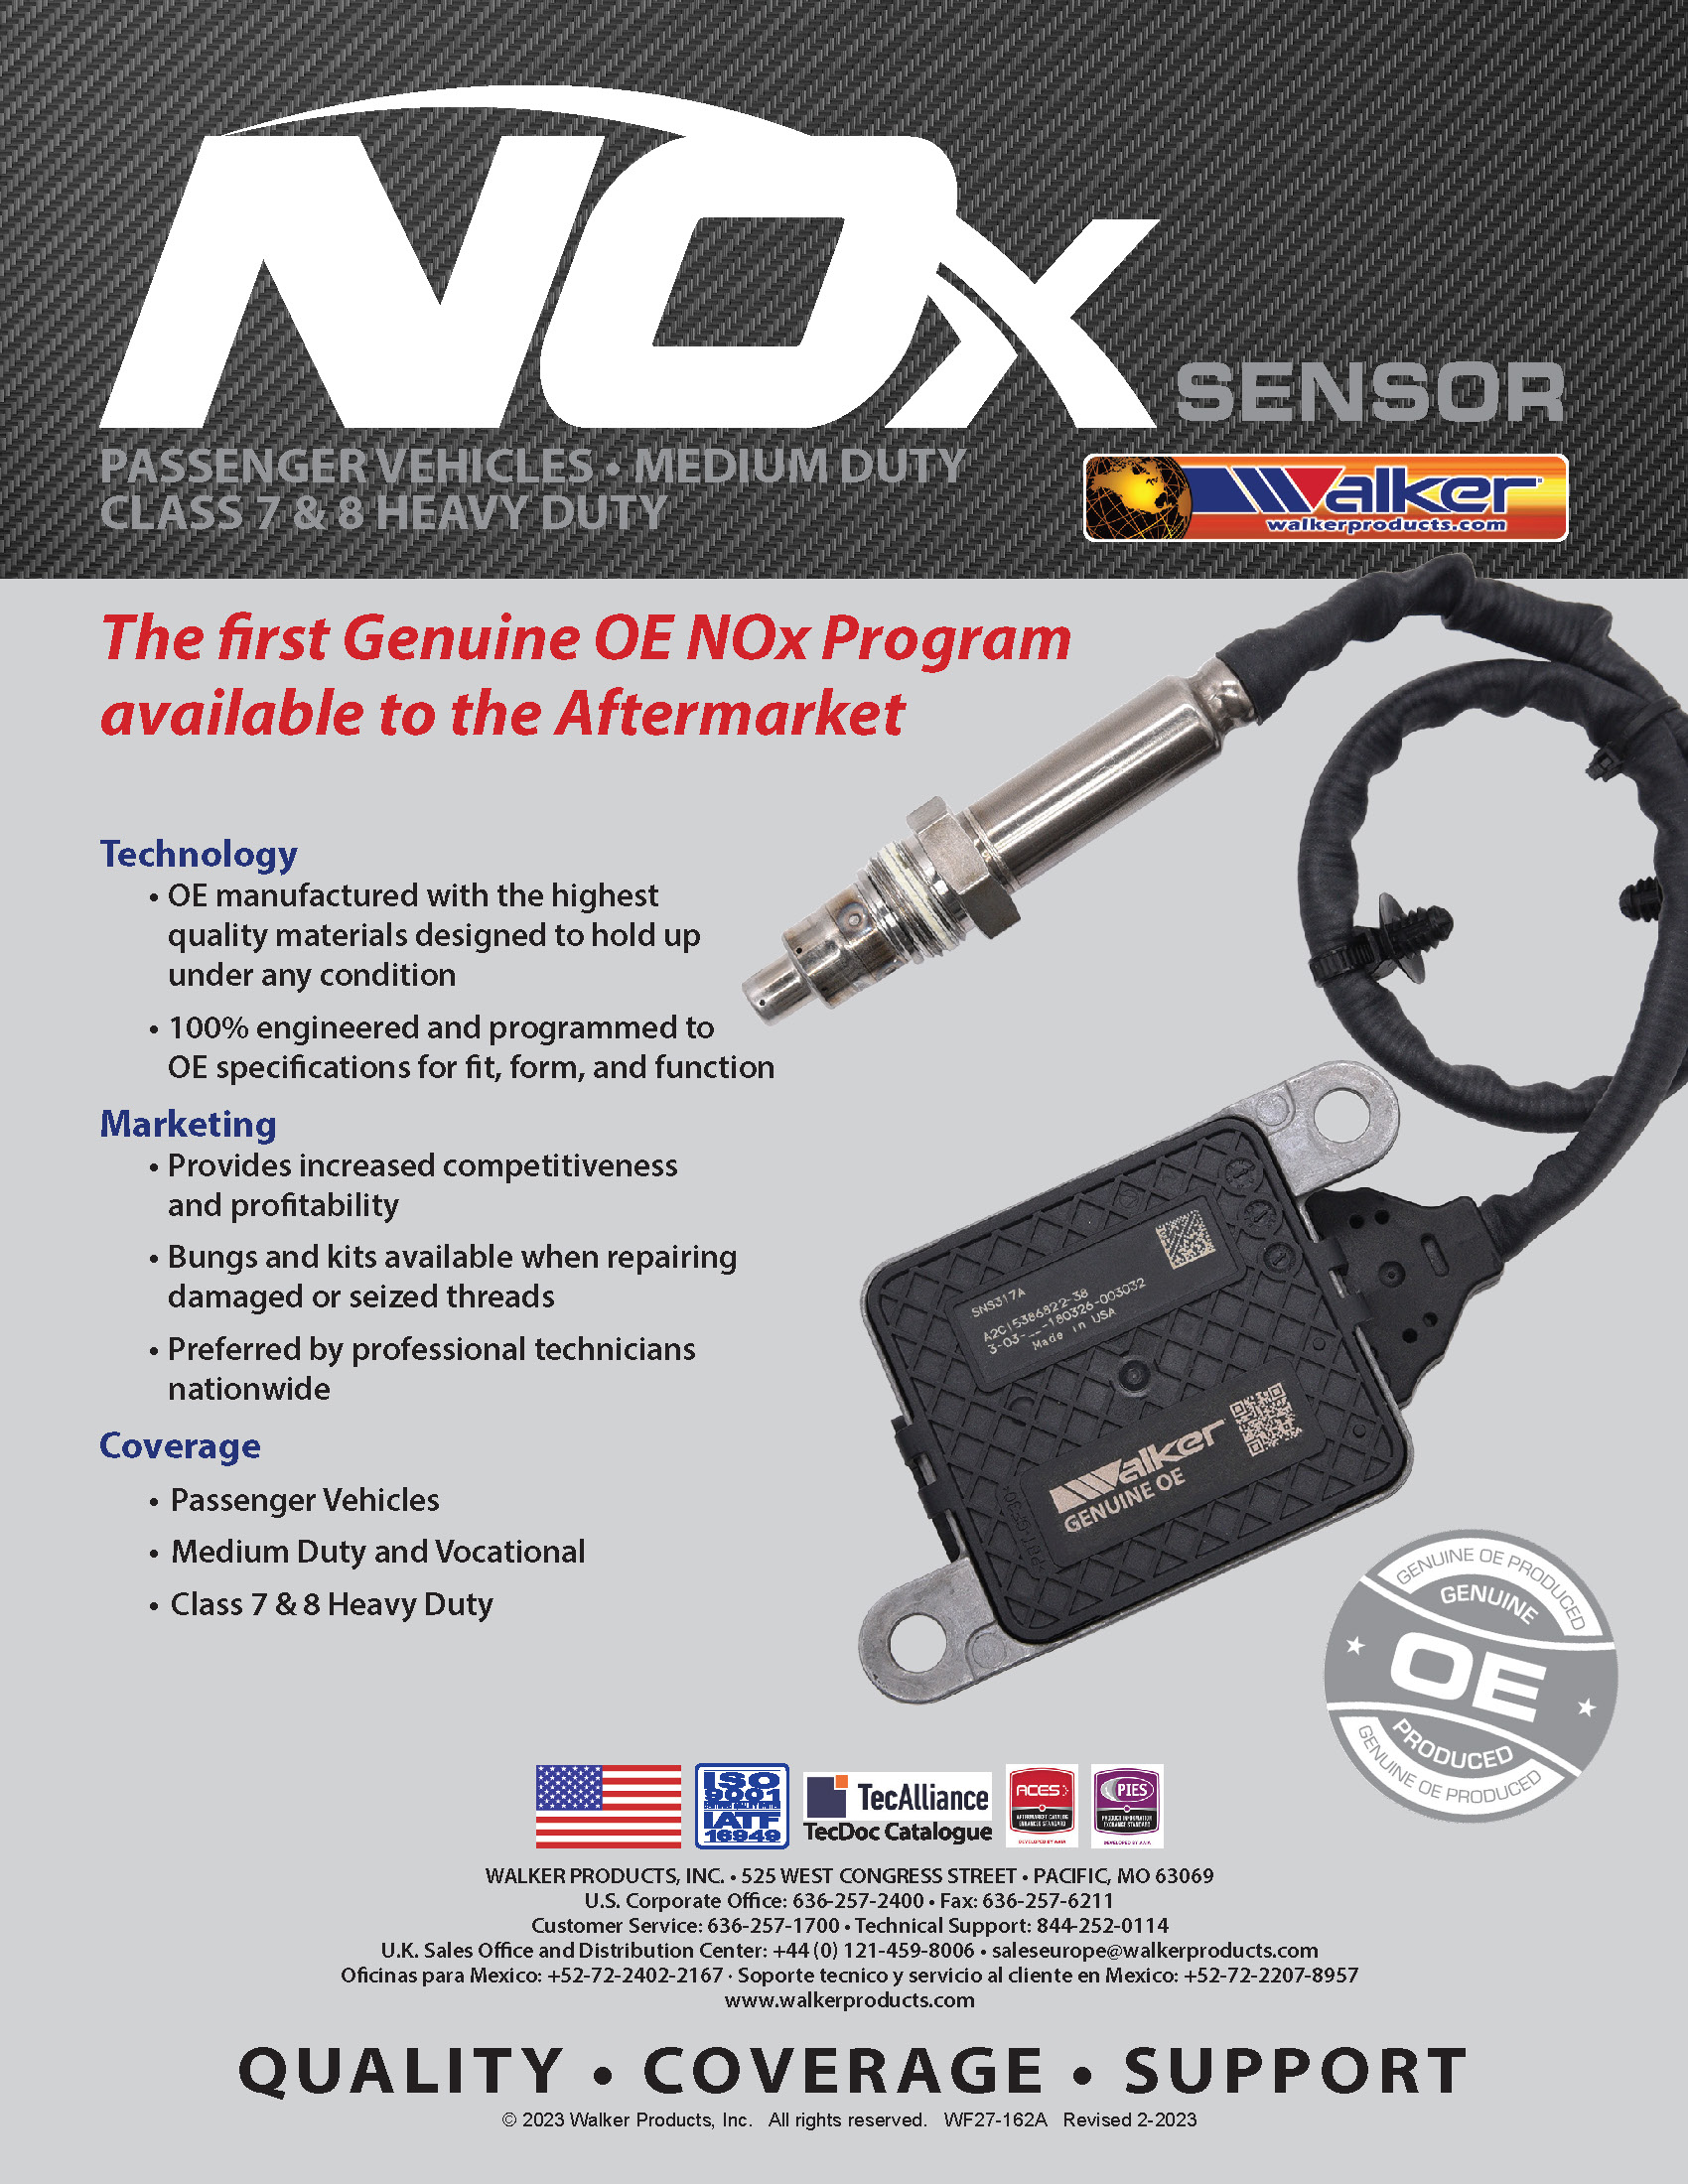 DriveArchive - Articles - NOx Sensors: What They Are and How They Work